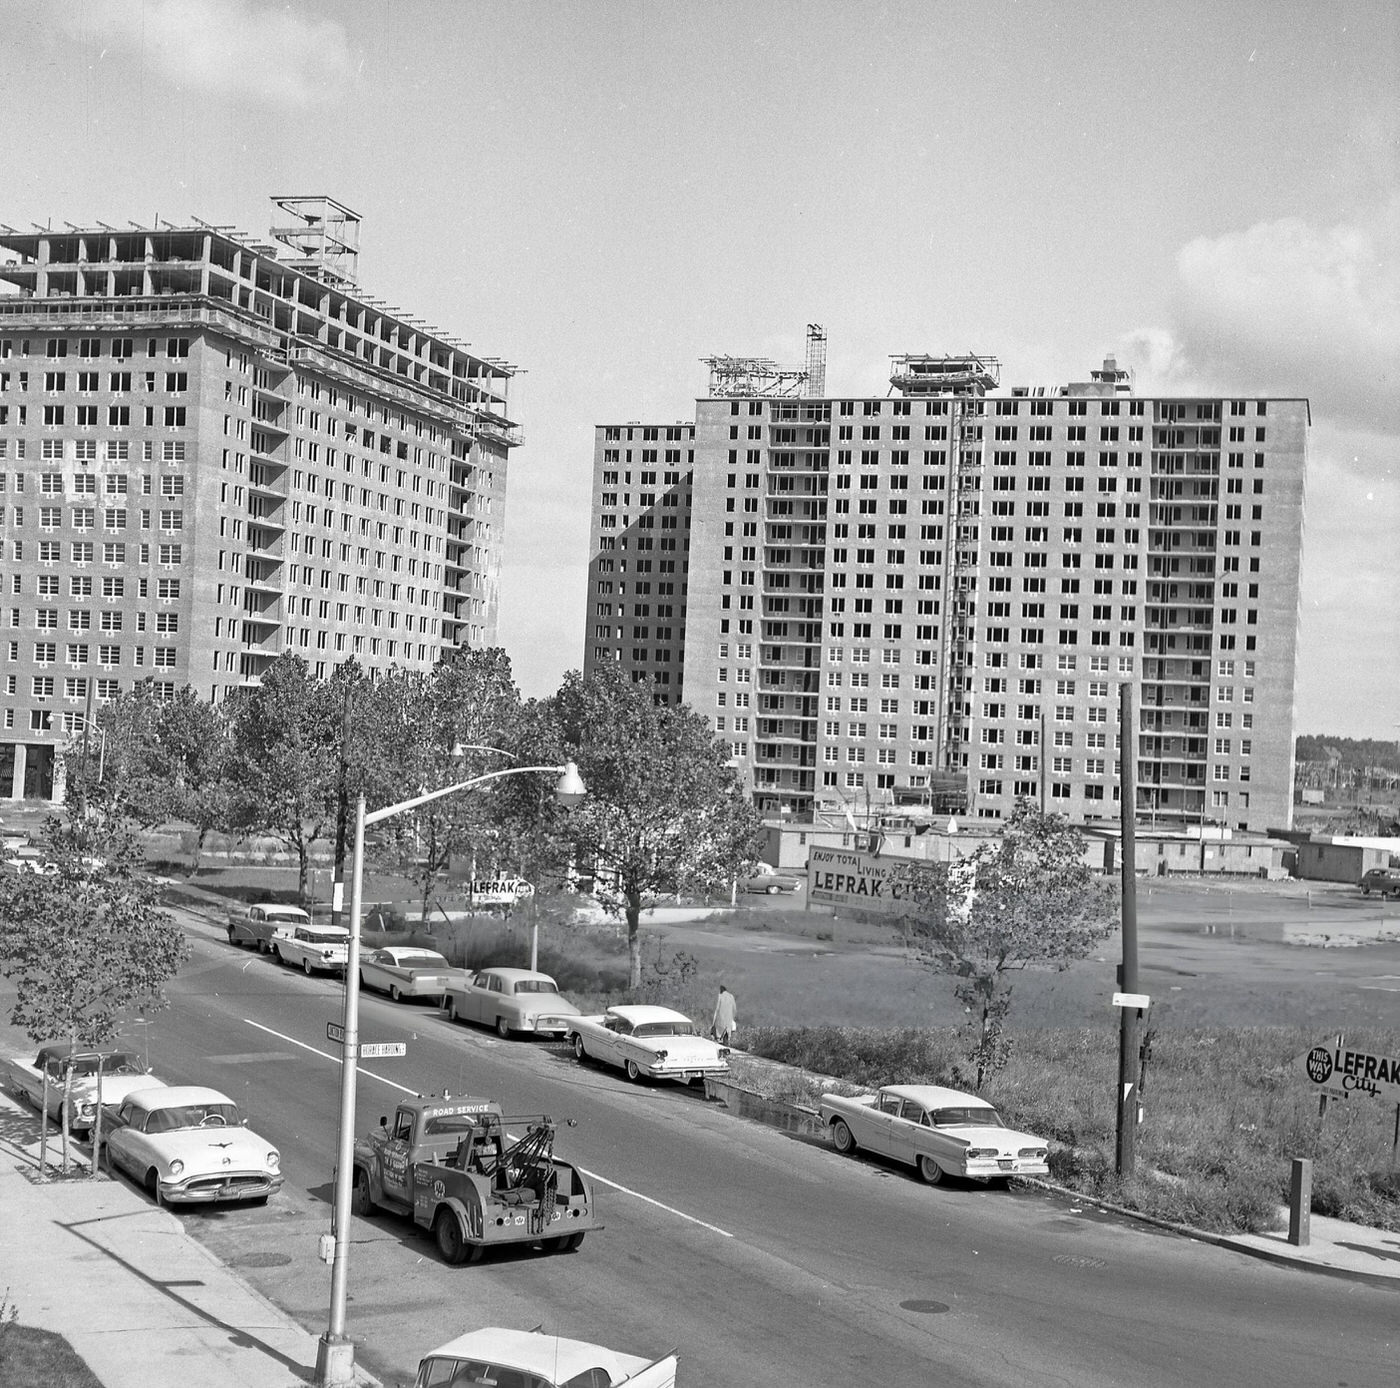 Construction Of The Lefrak City Apartment Complex And A Two-Truck Accident Scene, Queens, 1963.